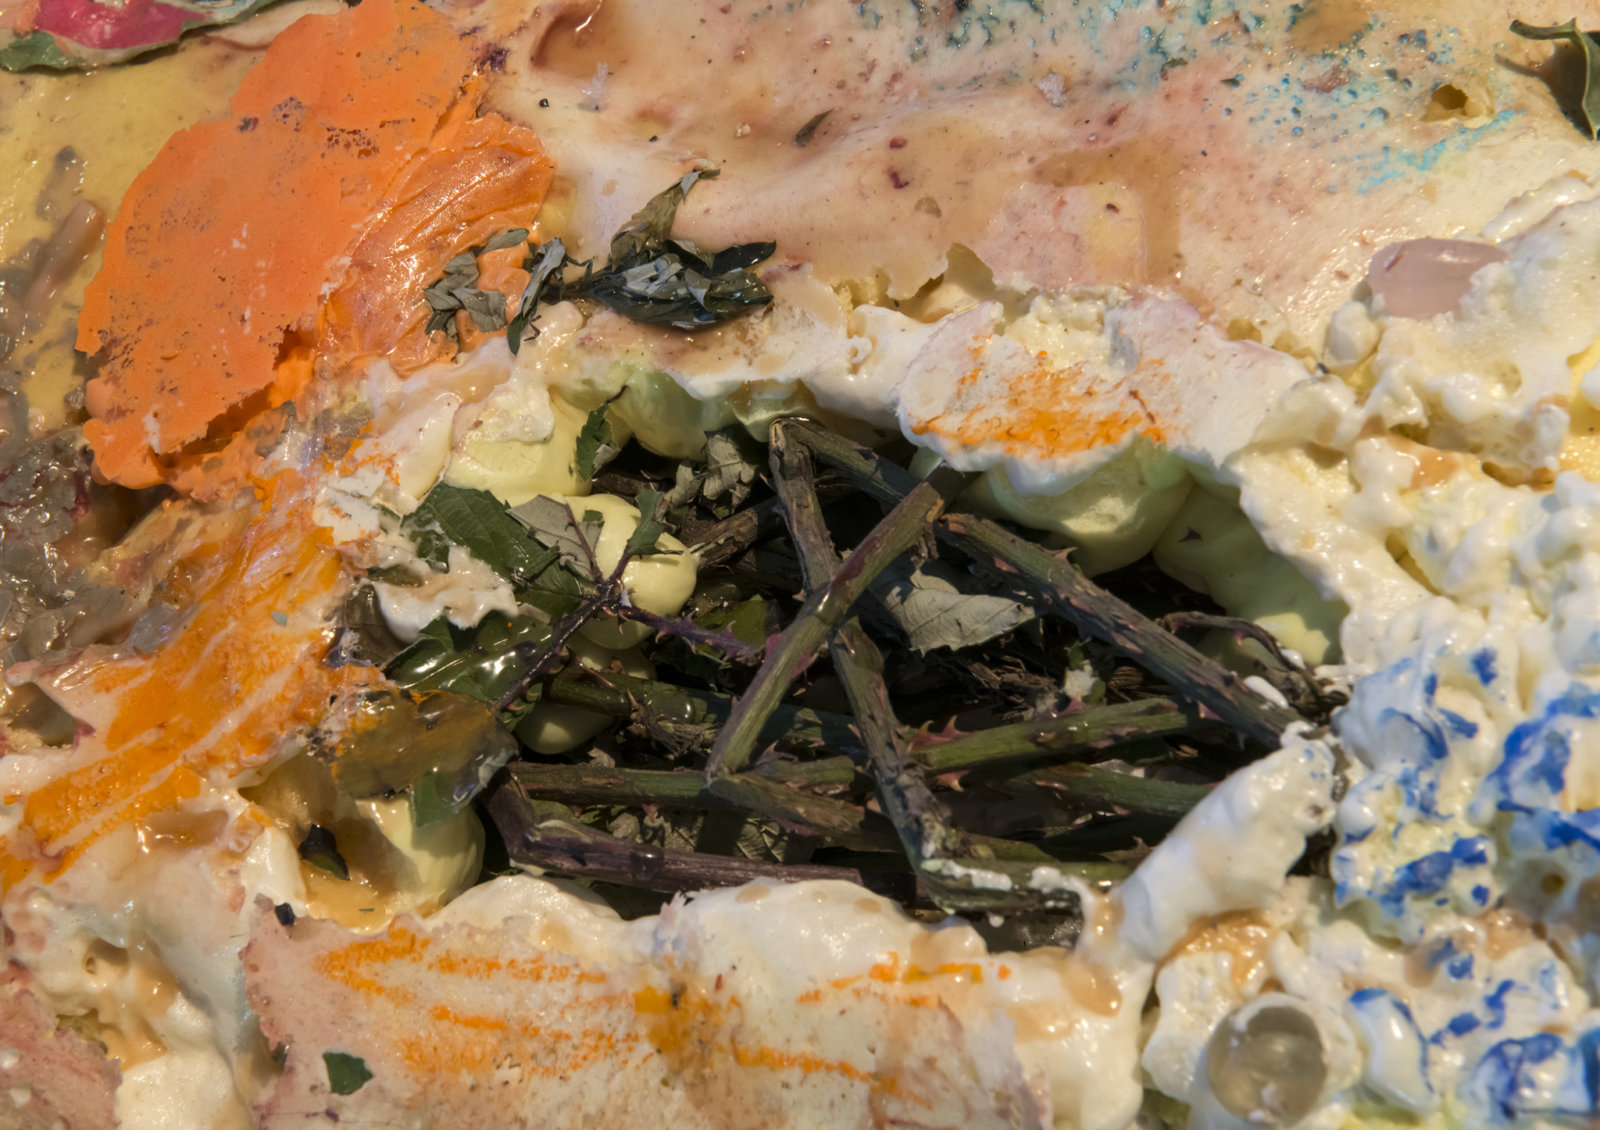 Kasper Feyrer, Corpse, Maiden (detail), 2018, insulation foam, whistle, glass marbles, mineral rocks, broken rulers, coins, lenses, blackberry, mugwort, rope, hinges, gummy worms, plaster cast hands and feet, soil, aluminum armature, latex, pigment, paper, cast iron, miscellaneous materials, 71 x 28 x 13 in. (180 x 71 x 33 cm)